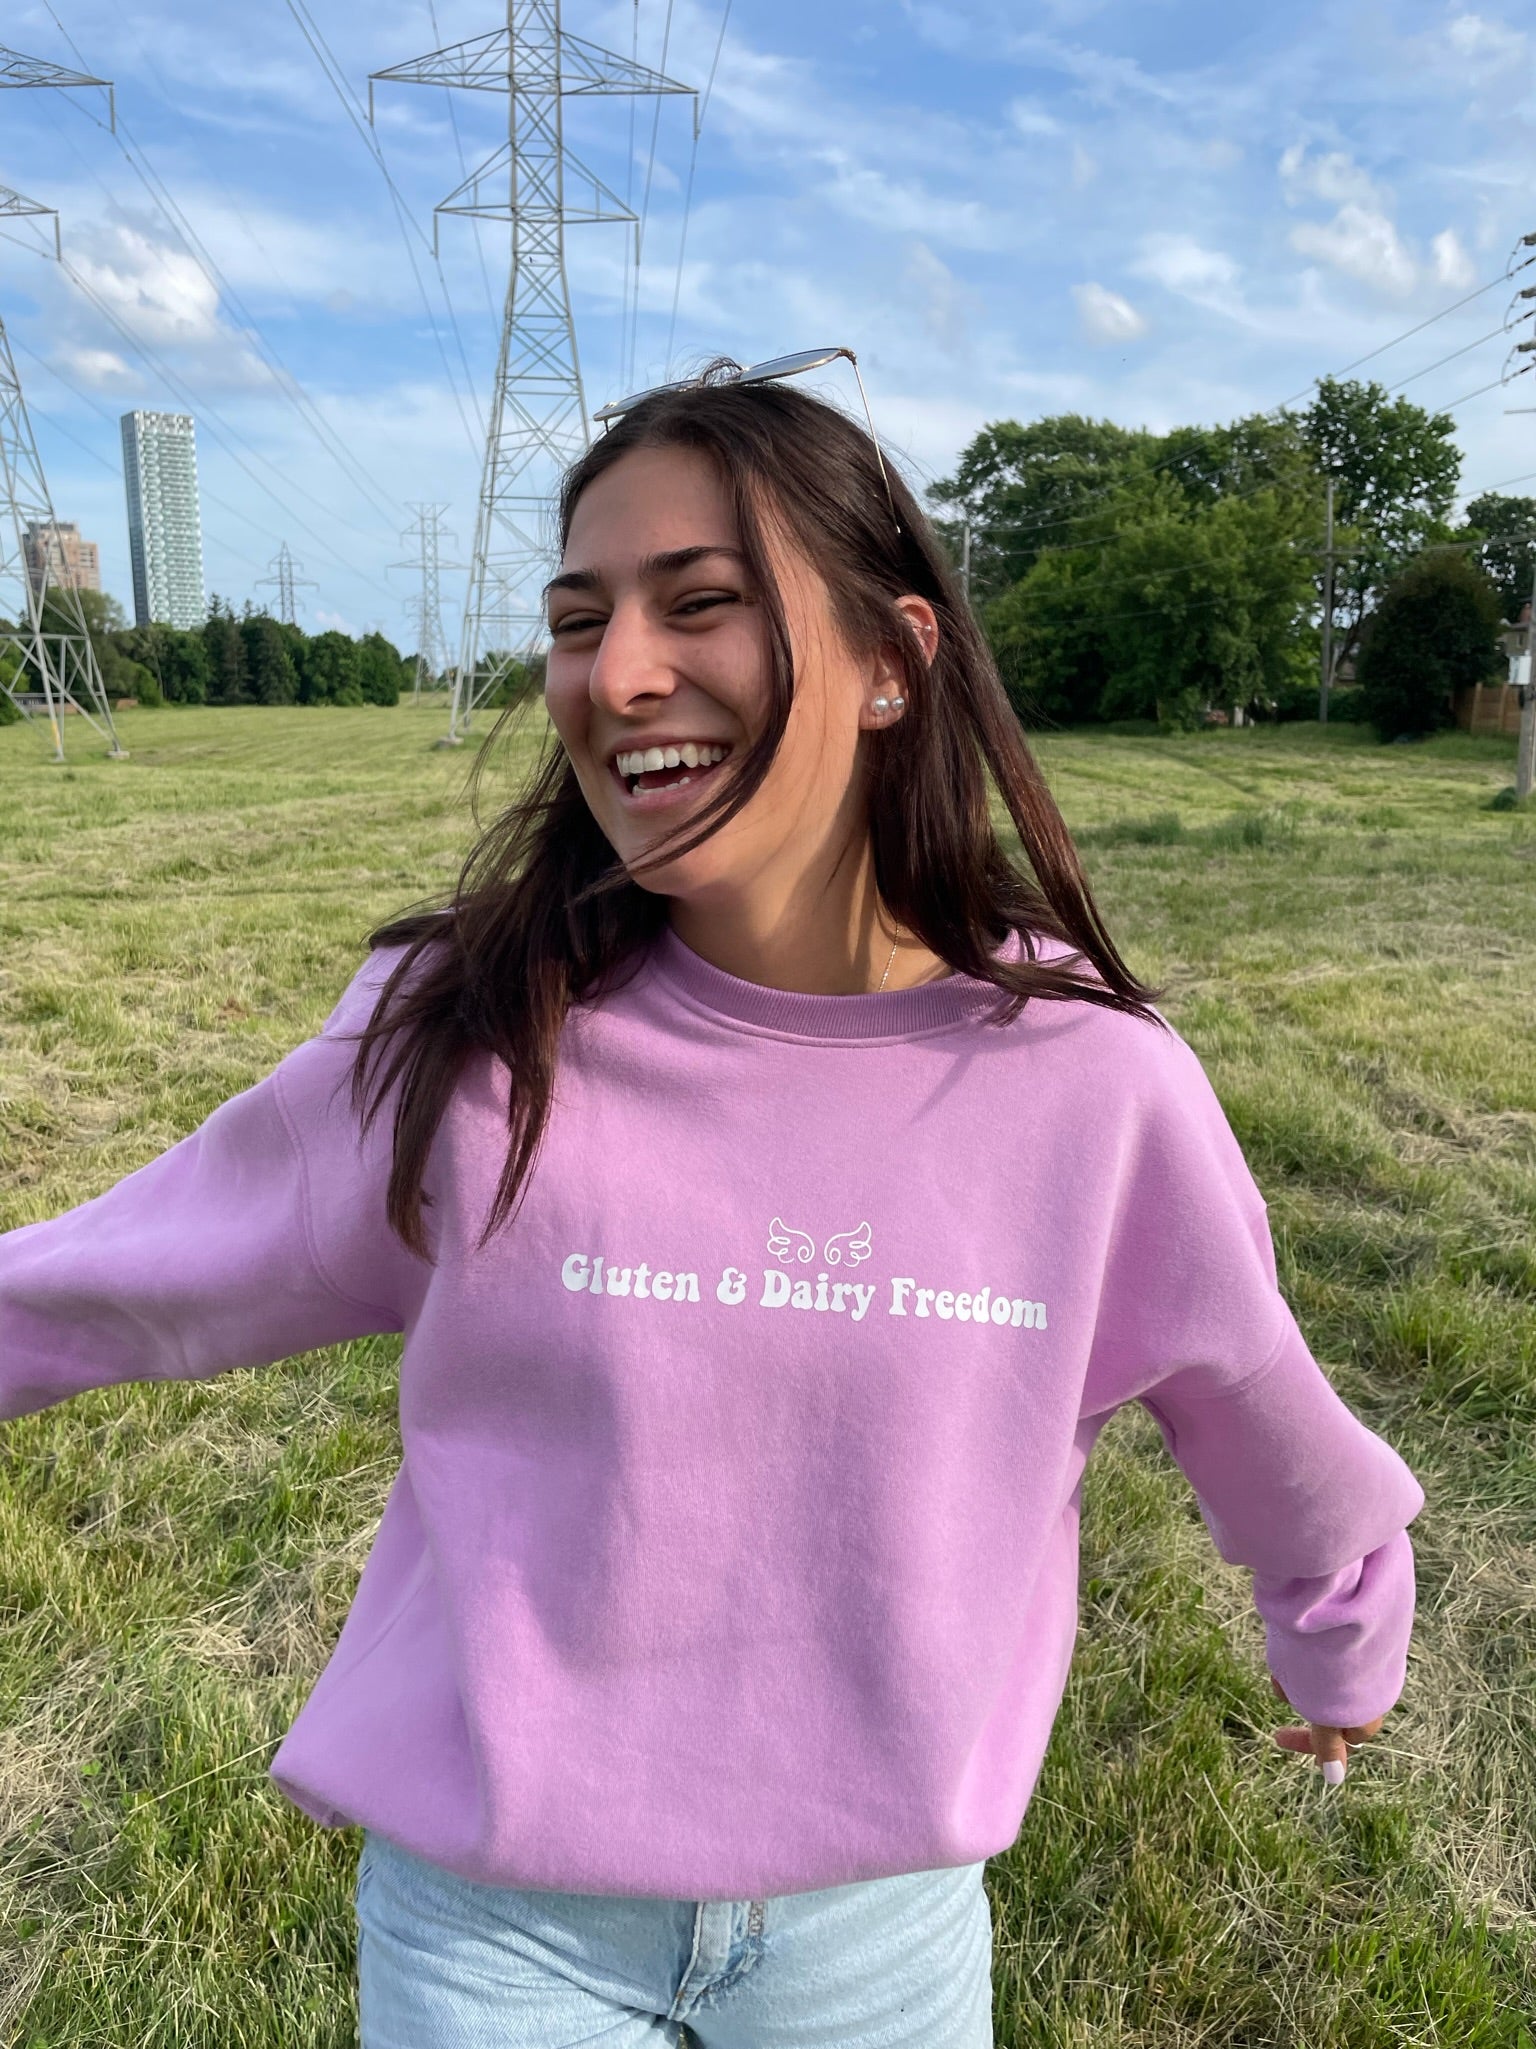 Model showing the front of the pink gluten free crewneck with the name "Gluten & Dairy Freedom" in the centre.